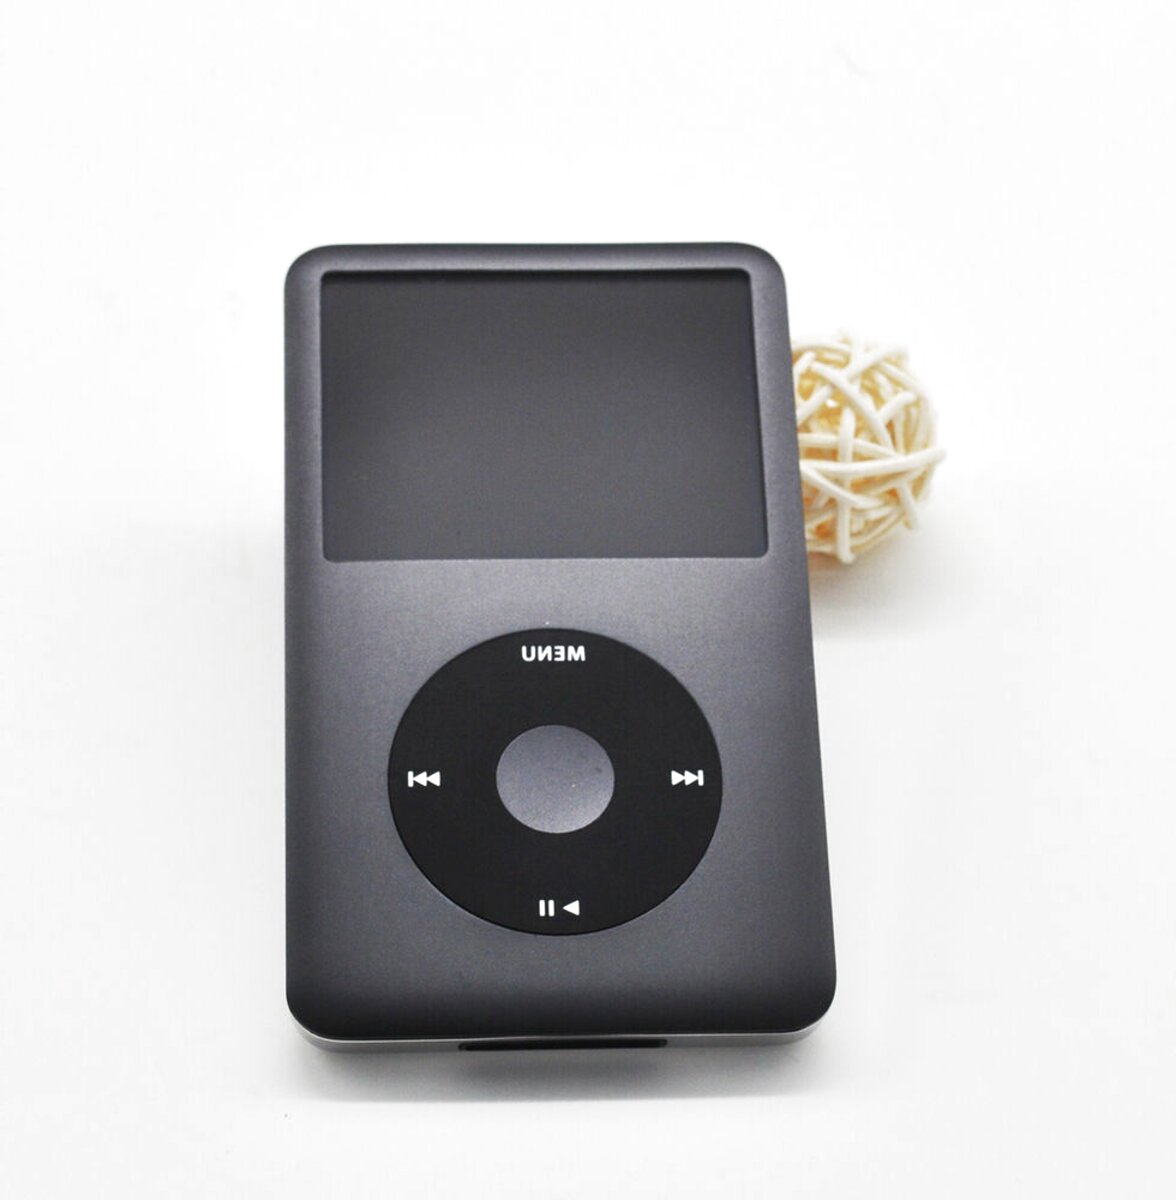 Ipod Classic 160Gb Black for sale in UK | View 59 ads